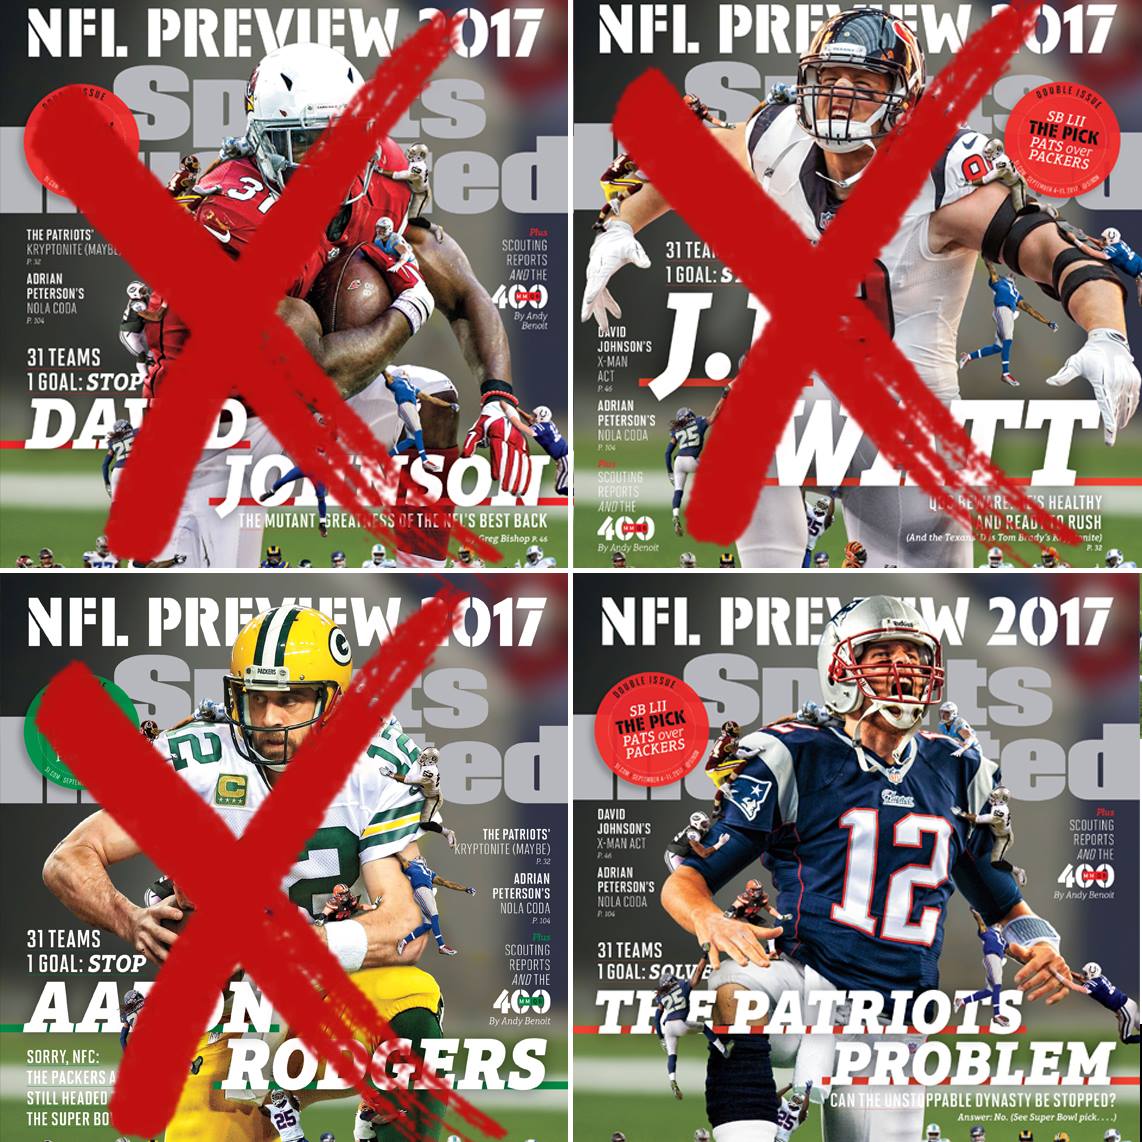 Every NFL Player To Grace Cover Of Sports Illustrated In 2017 Is Now  Injured, With Only Brady Left